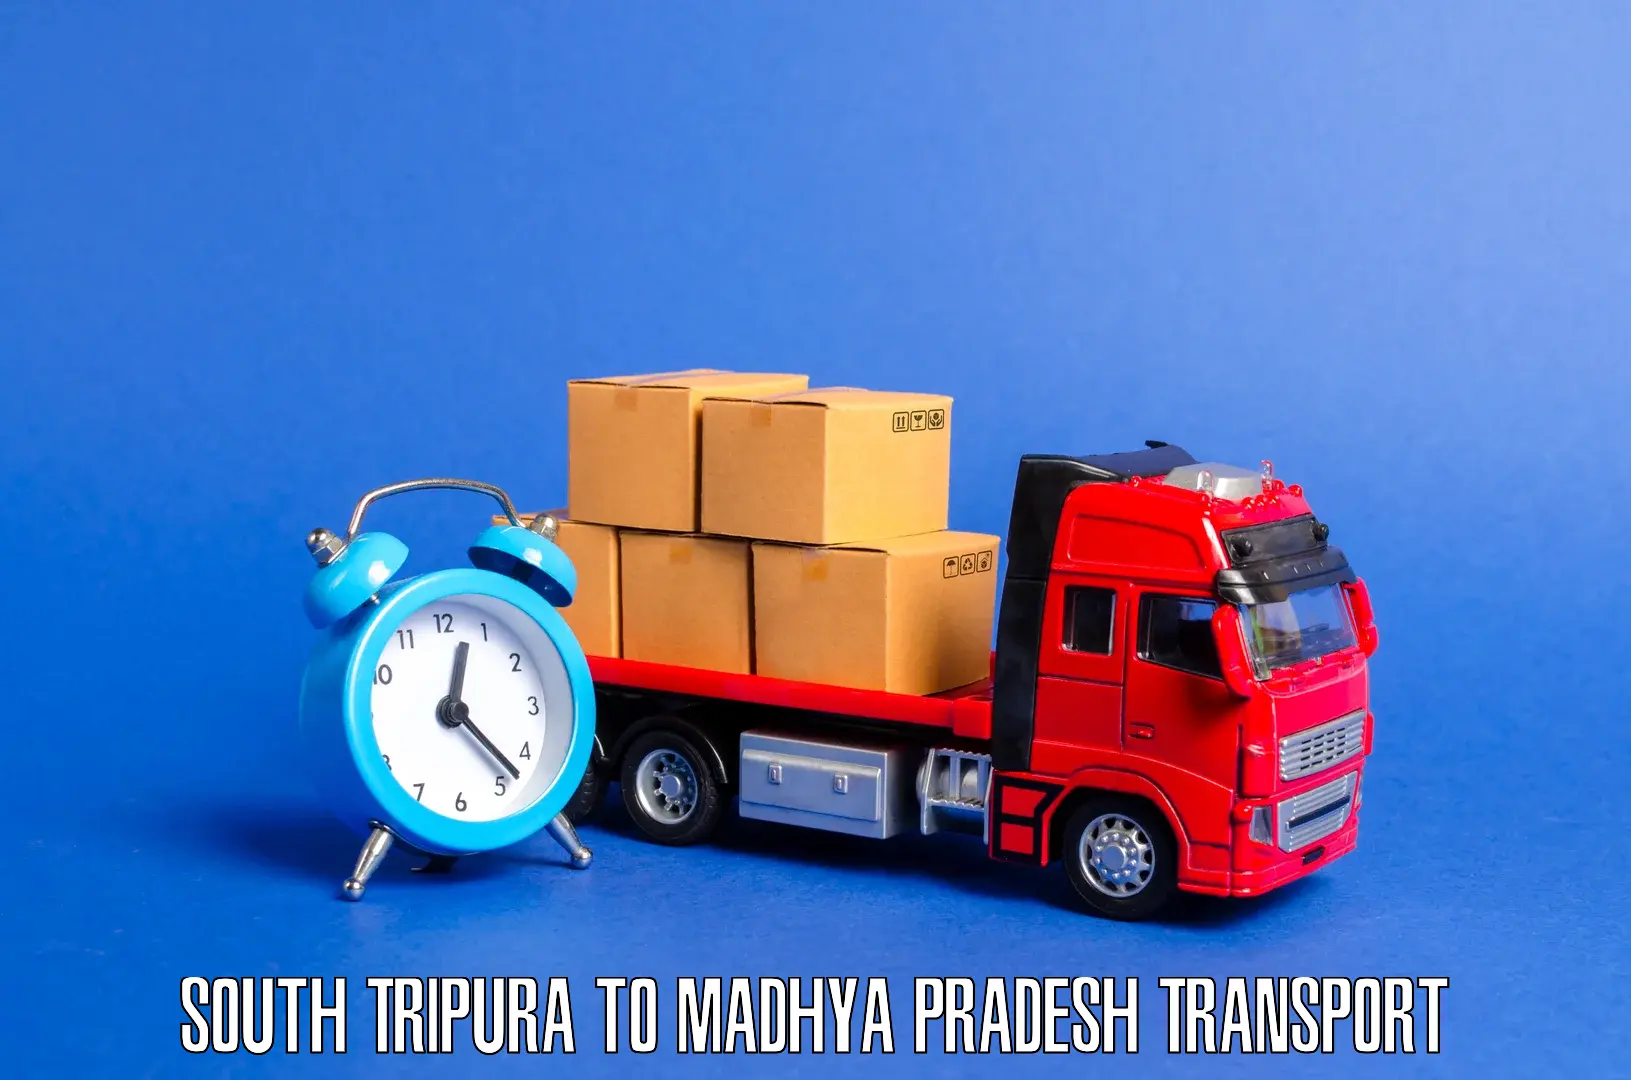 Nearby transport service South Tripura to Balaghat